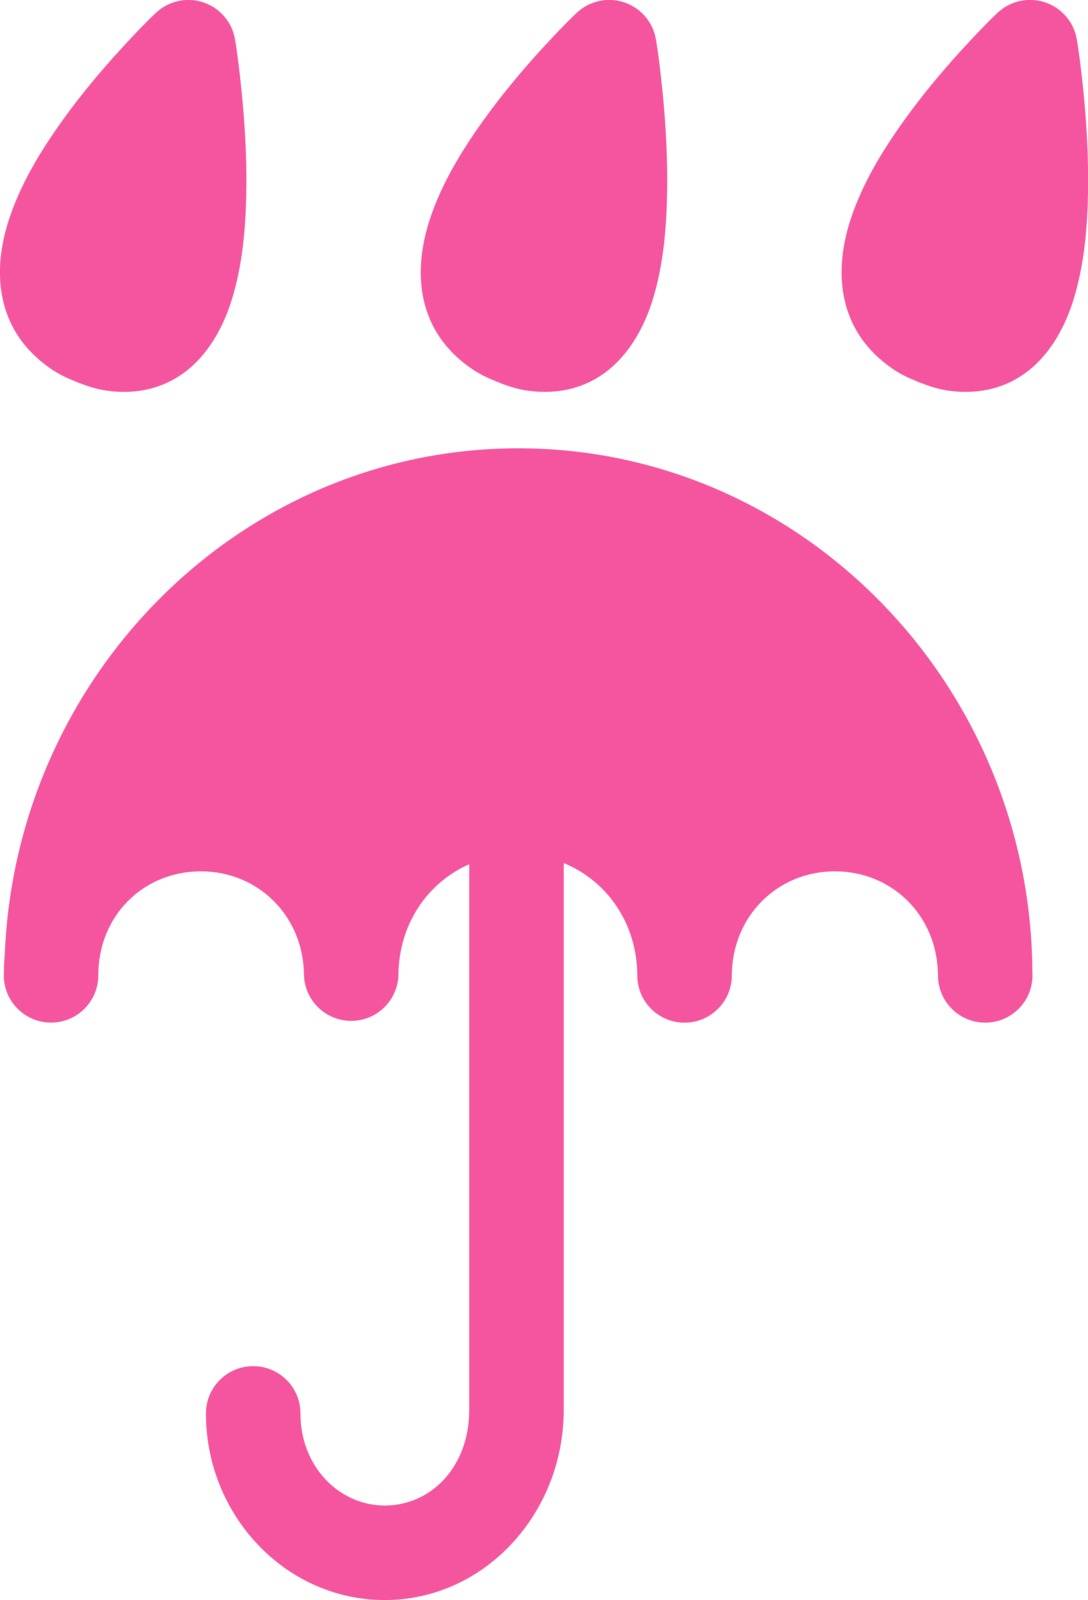 Rain protection icon by ahasoft